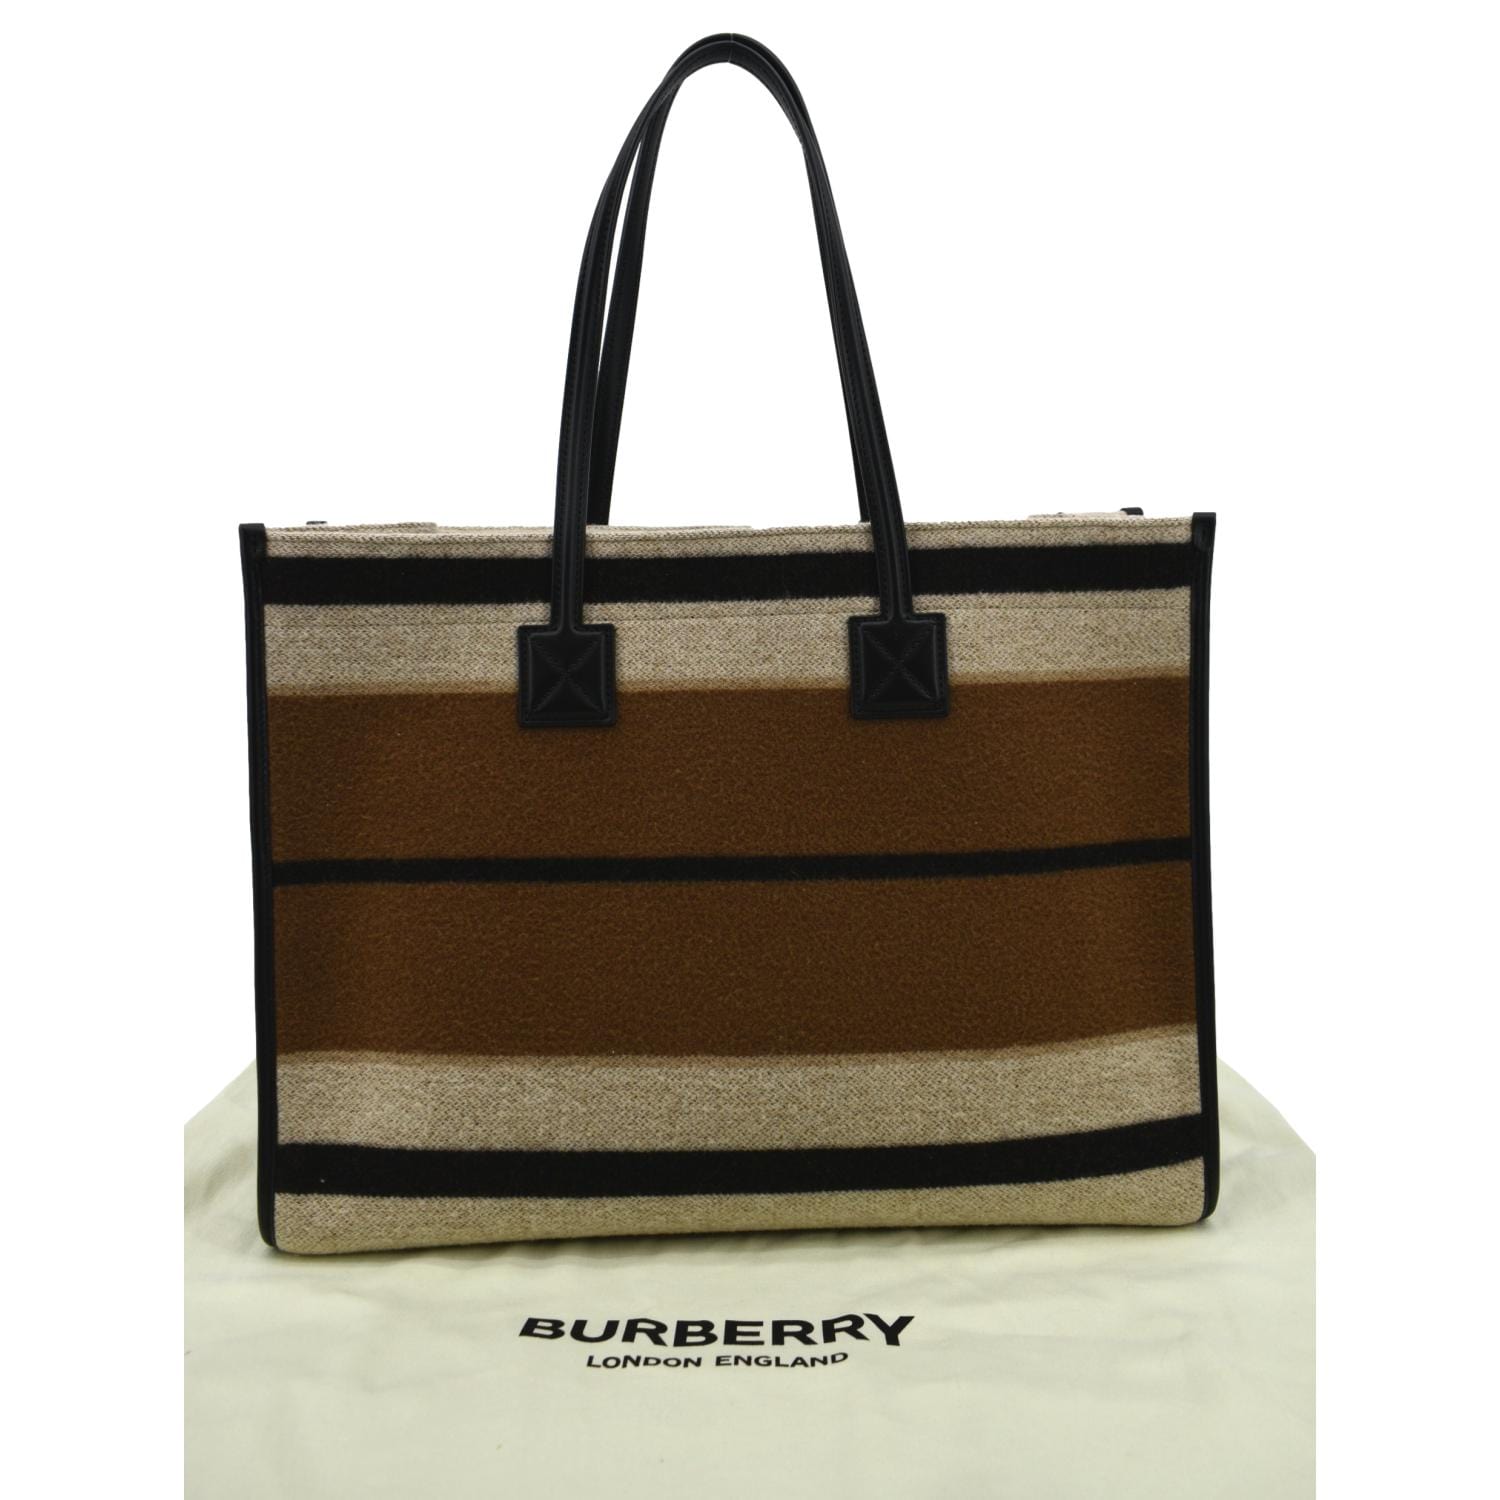 Burberry Medium Freya Natural/Tan Leather And Canvas Tote Bag New